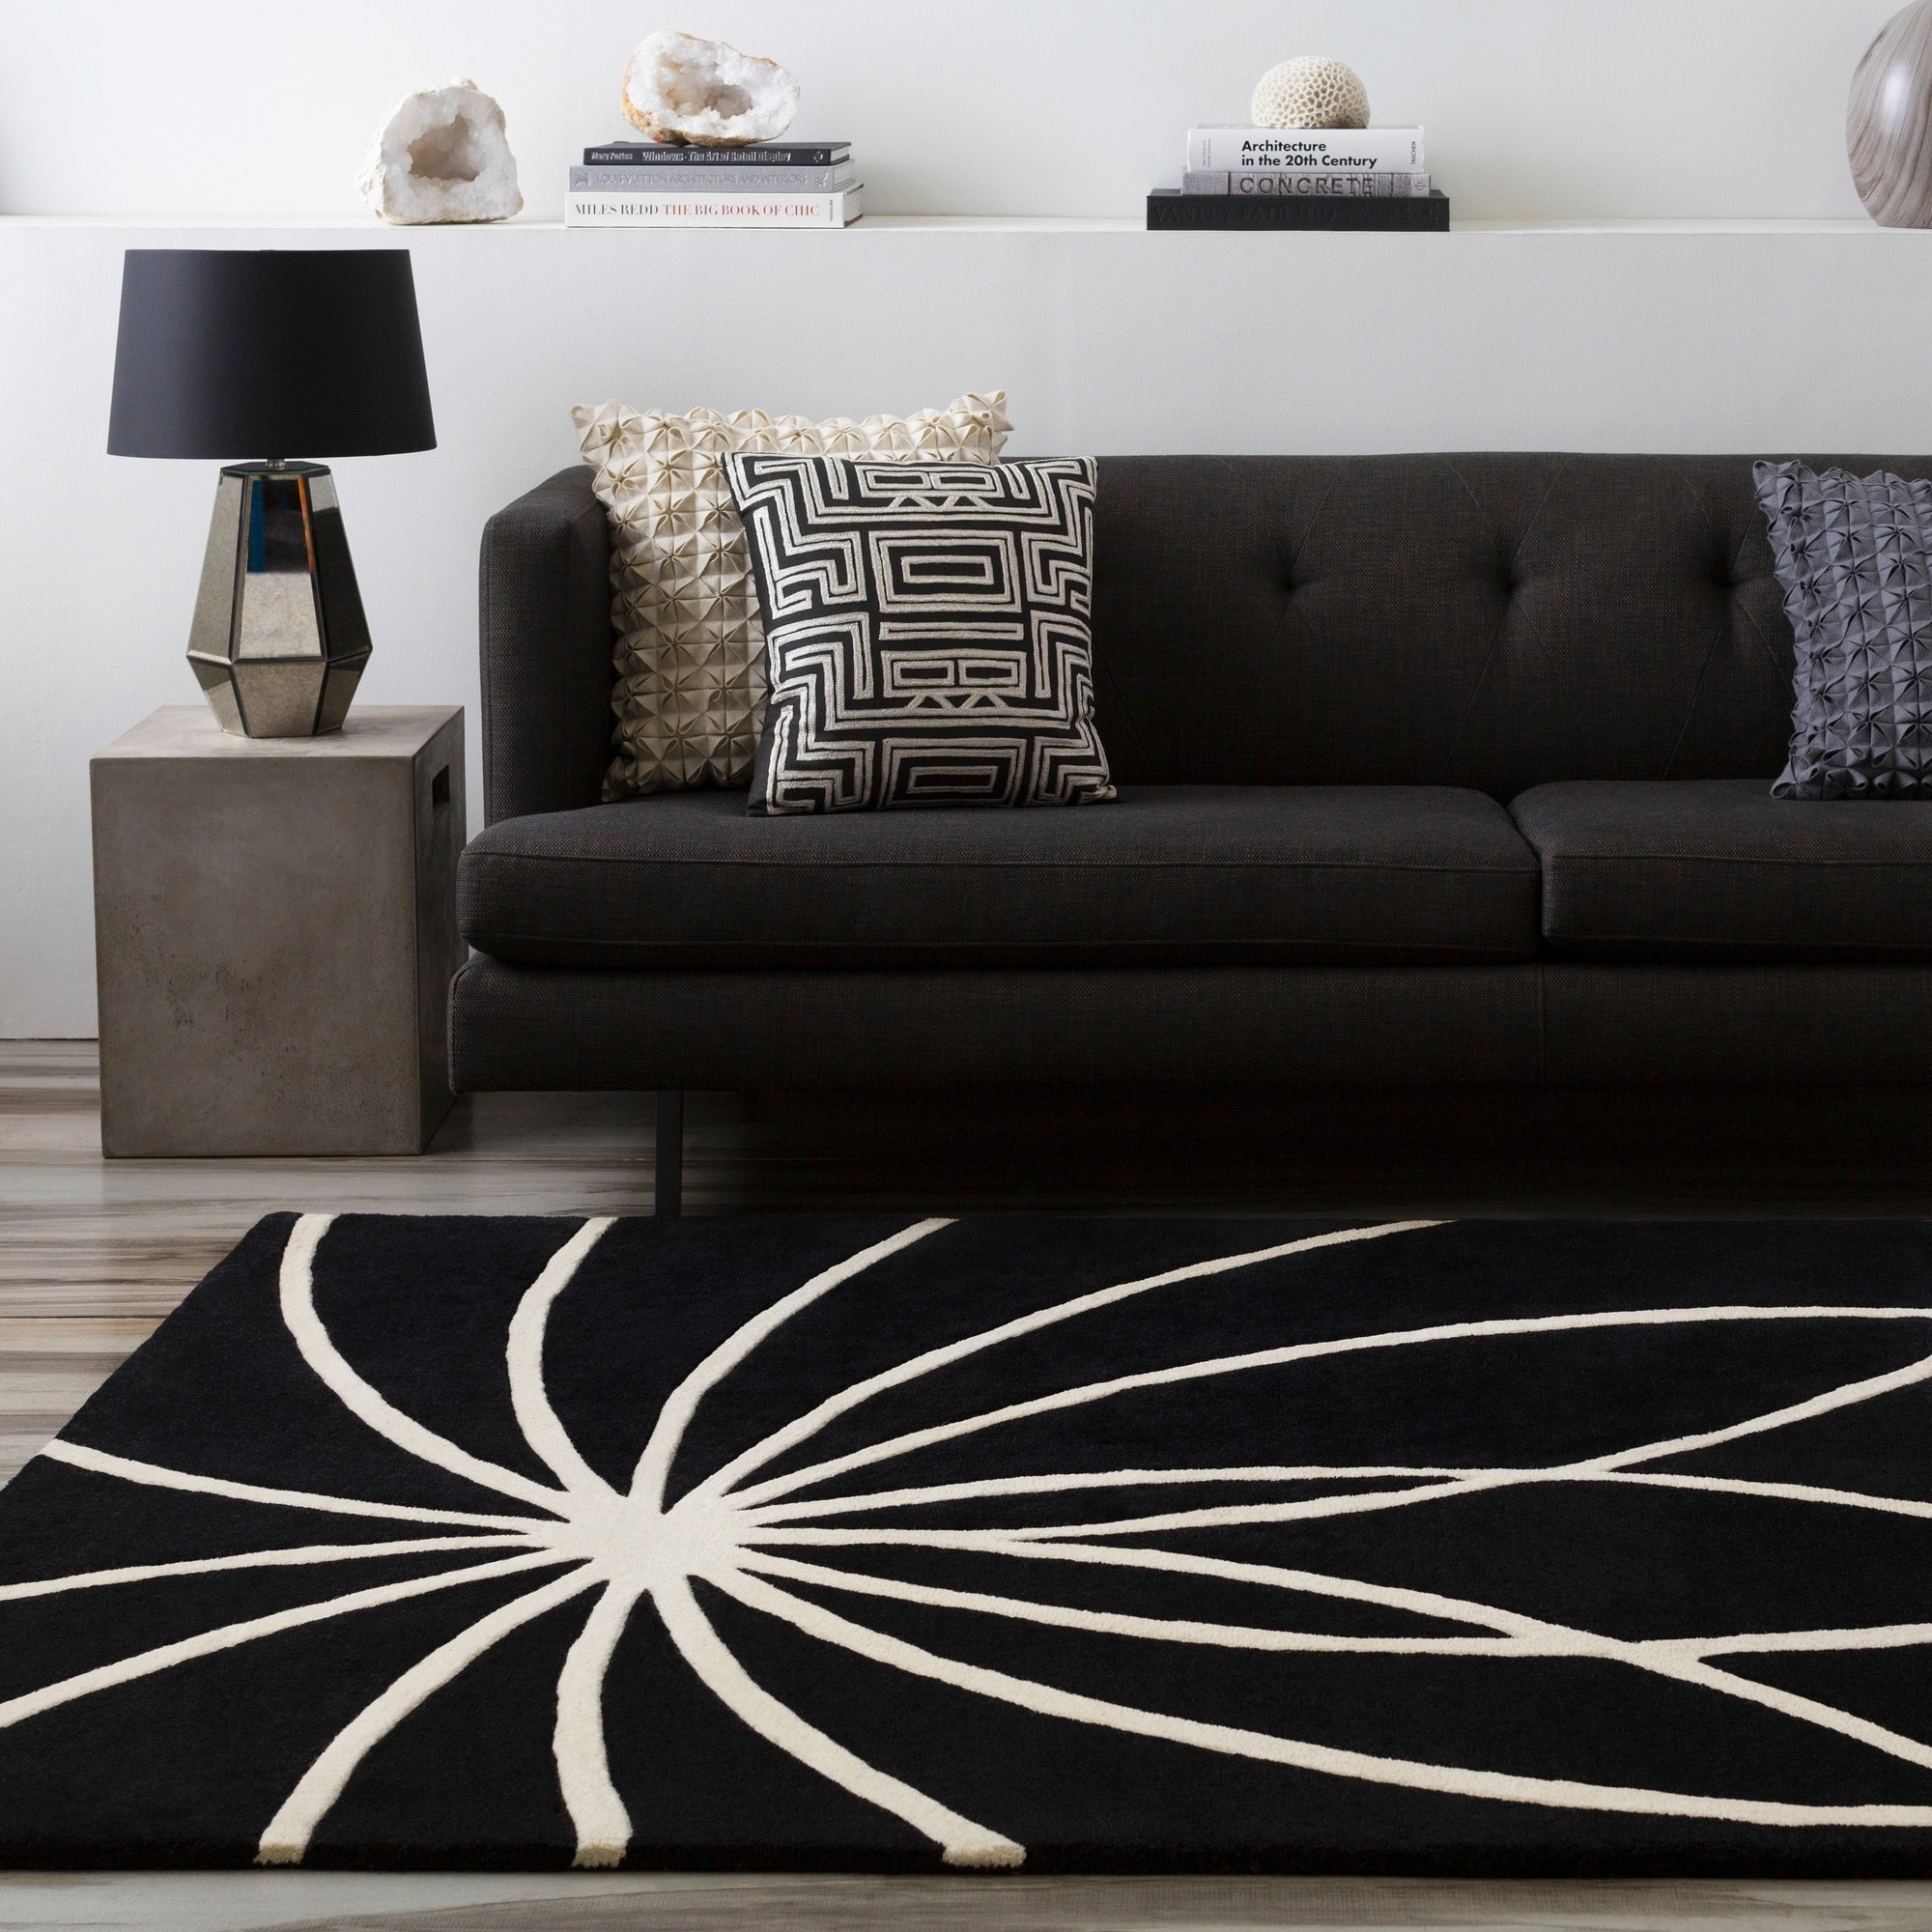 Hand tufted Contemporary Black/white Adler Wool Abstract Rug (9 X 12)